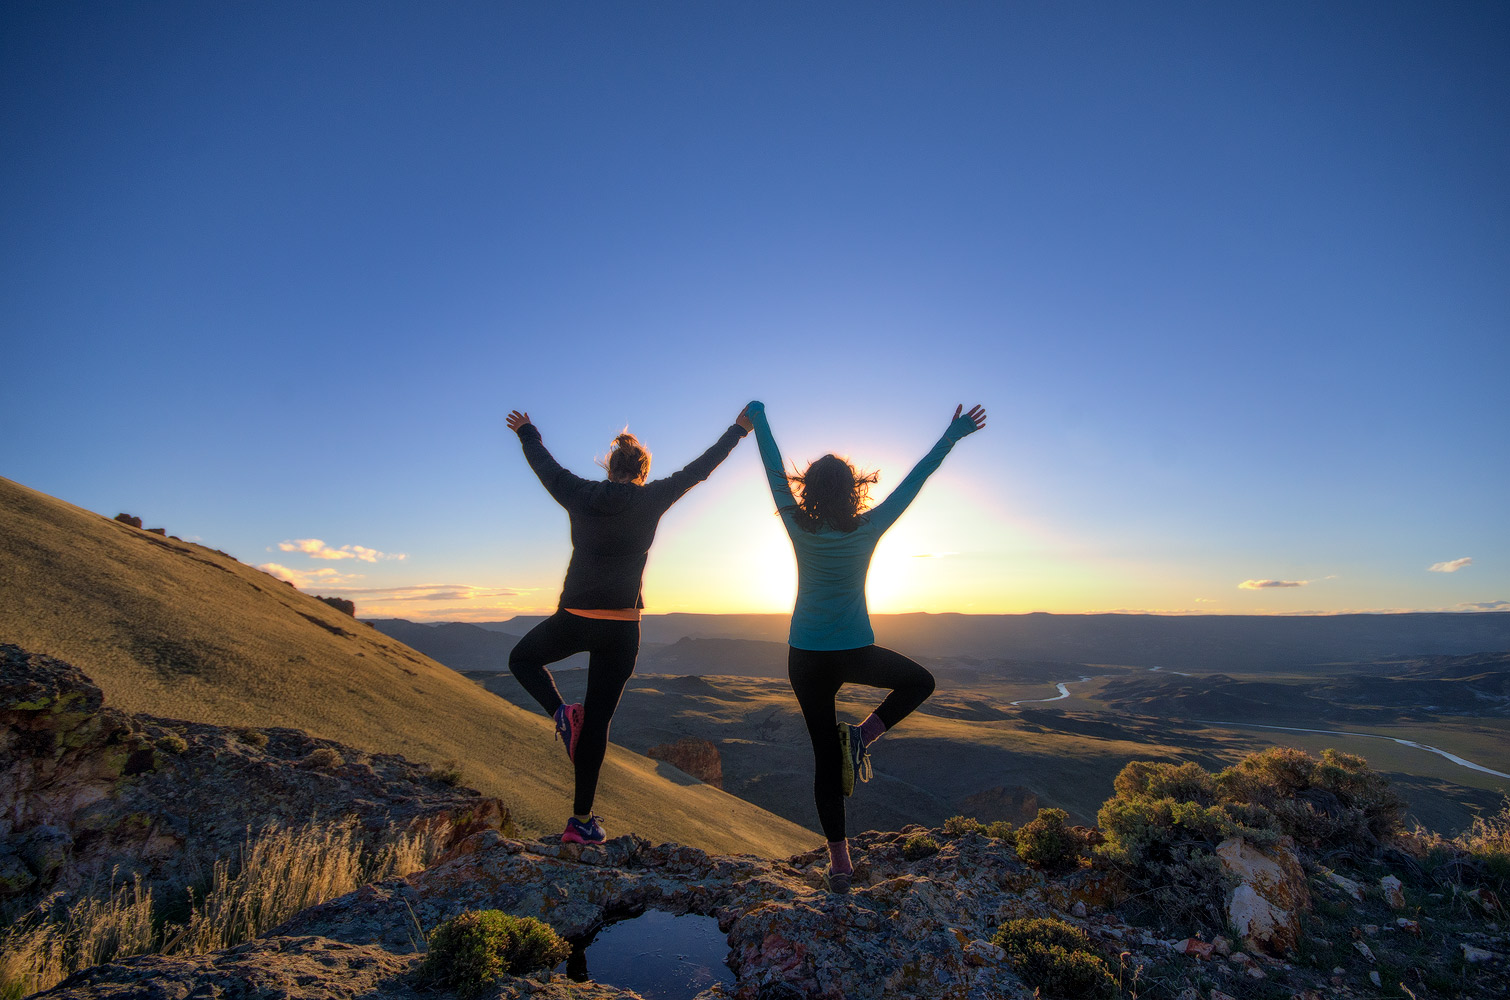 Two people stand in mountain pose on a hilltop at sunrise